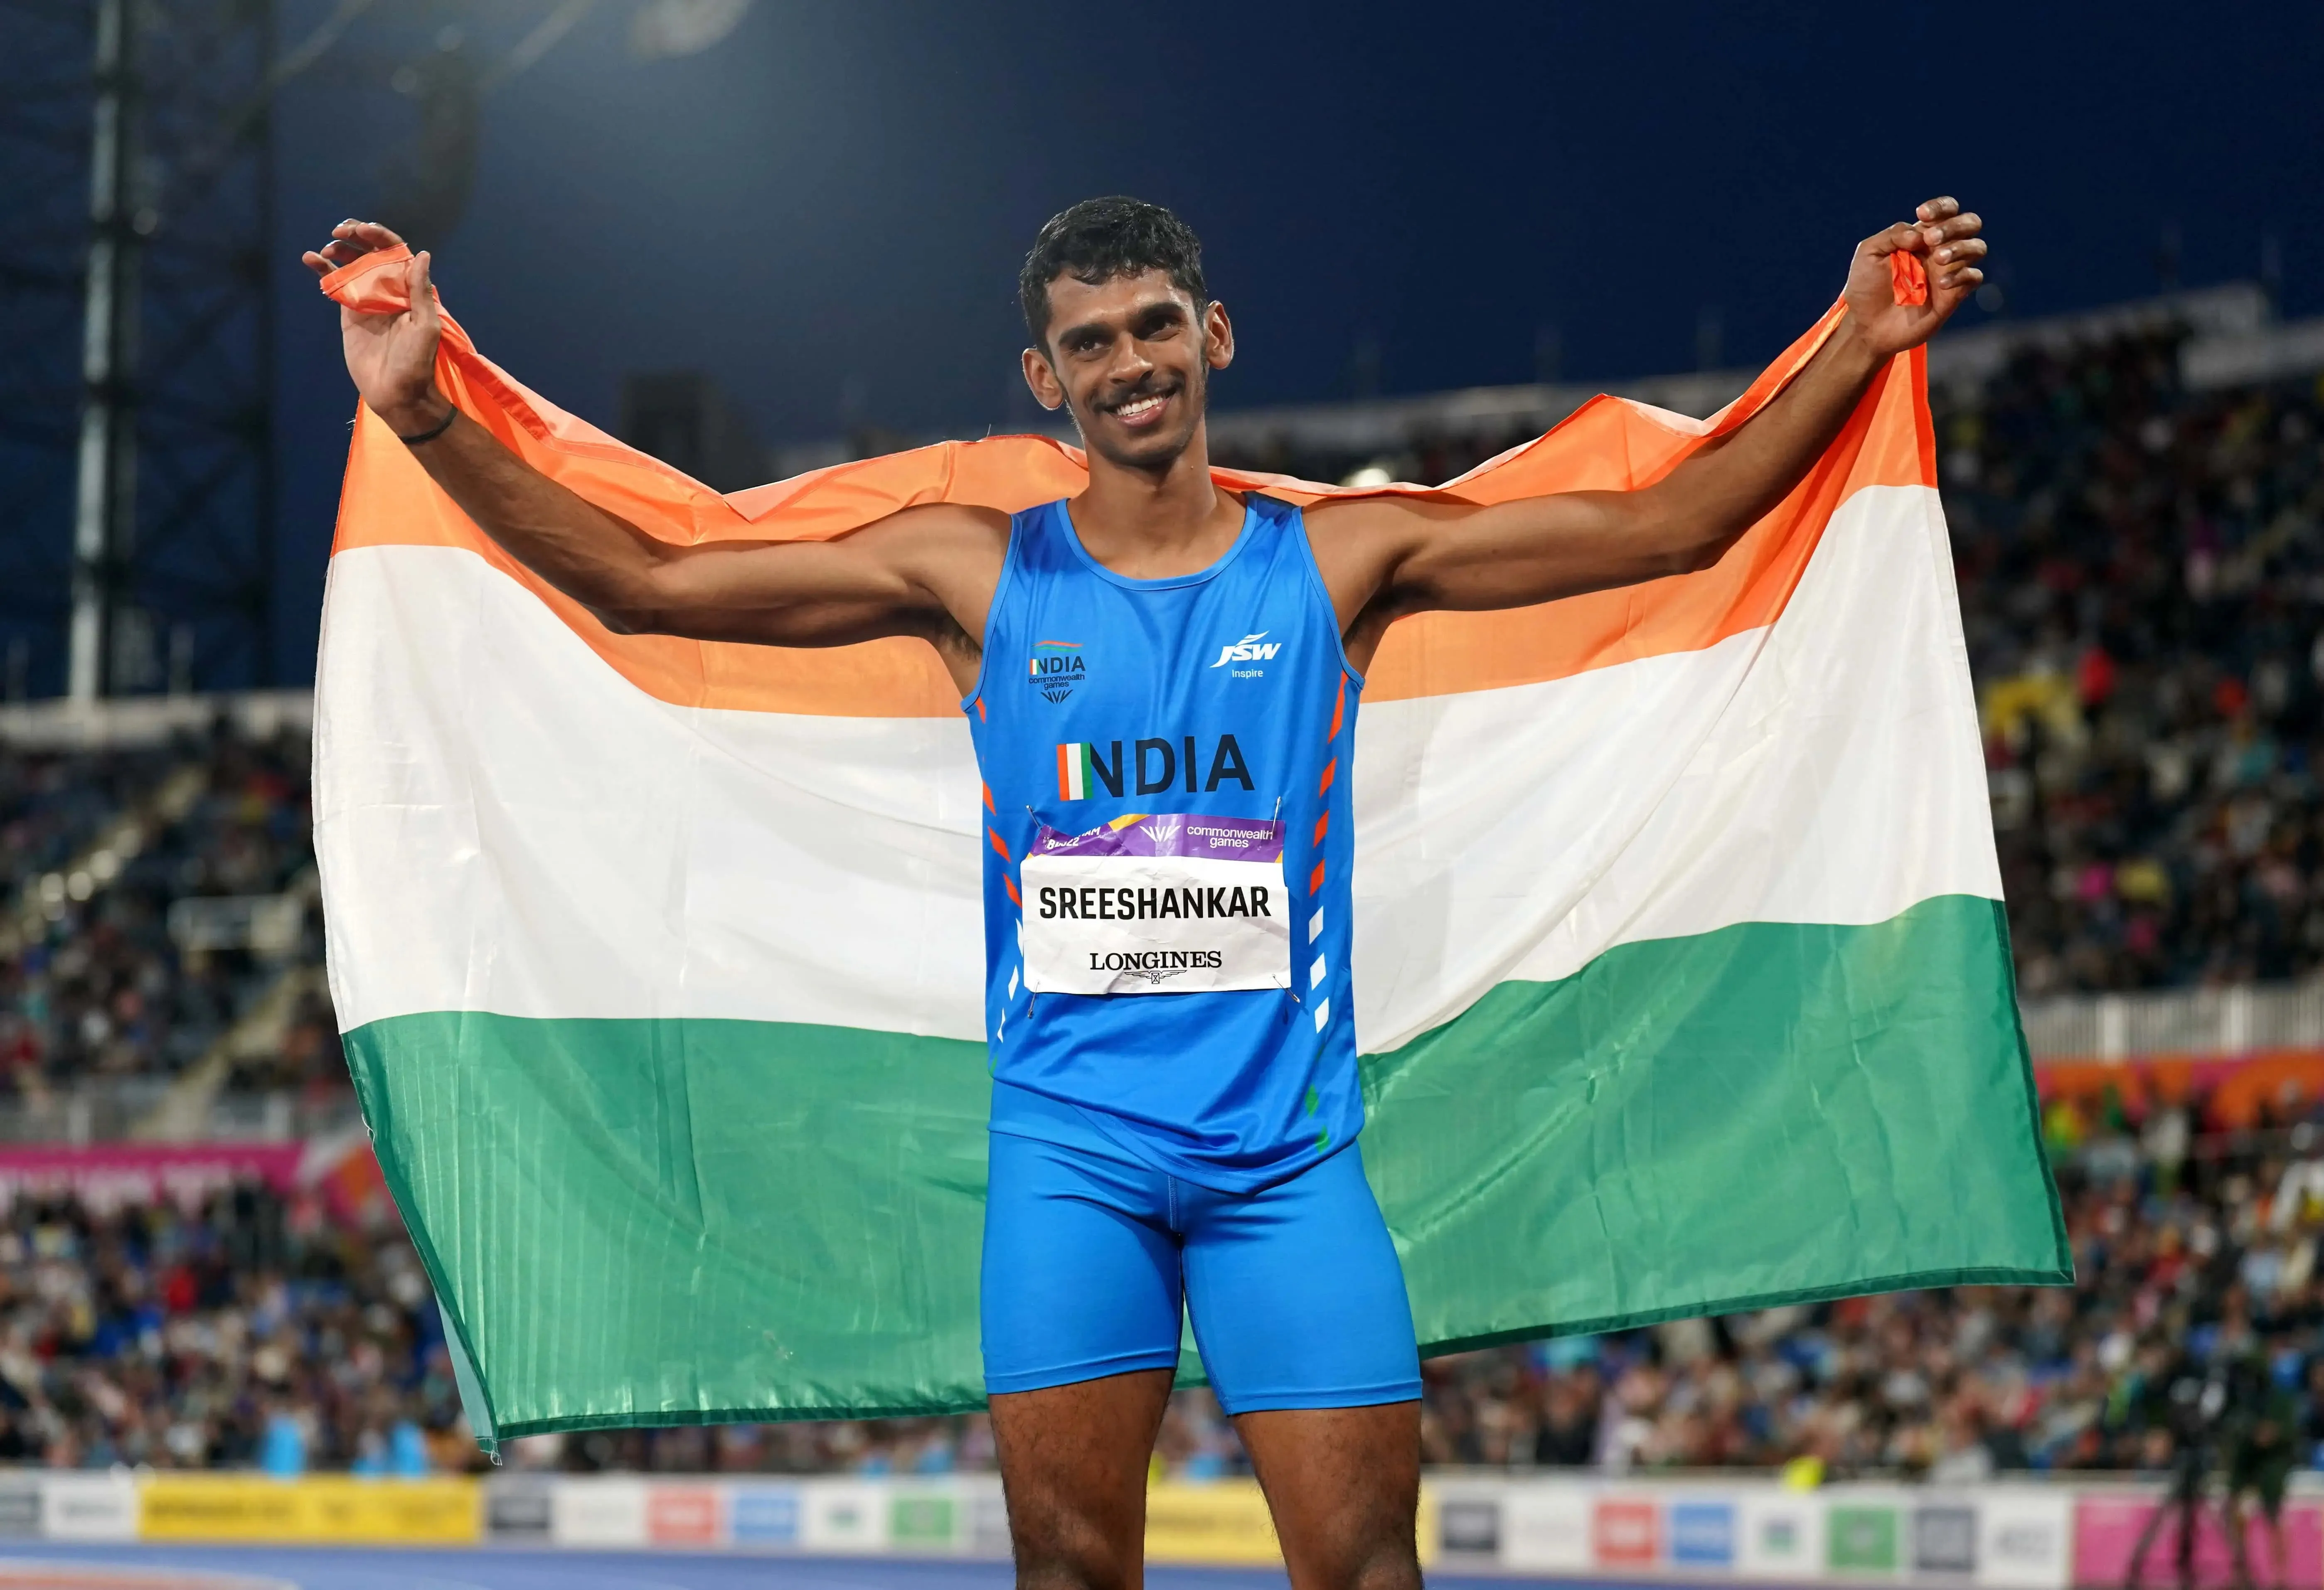 Murali is the 4th athlete from Kerala to qualify for Olympics since 1972. Image- Cultsport  